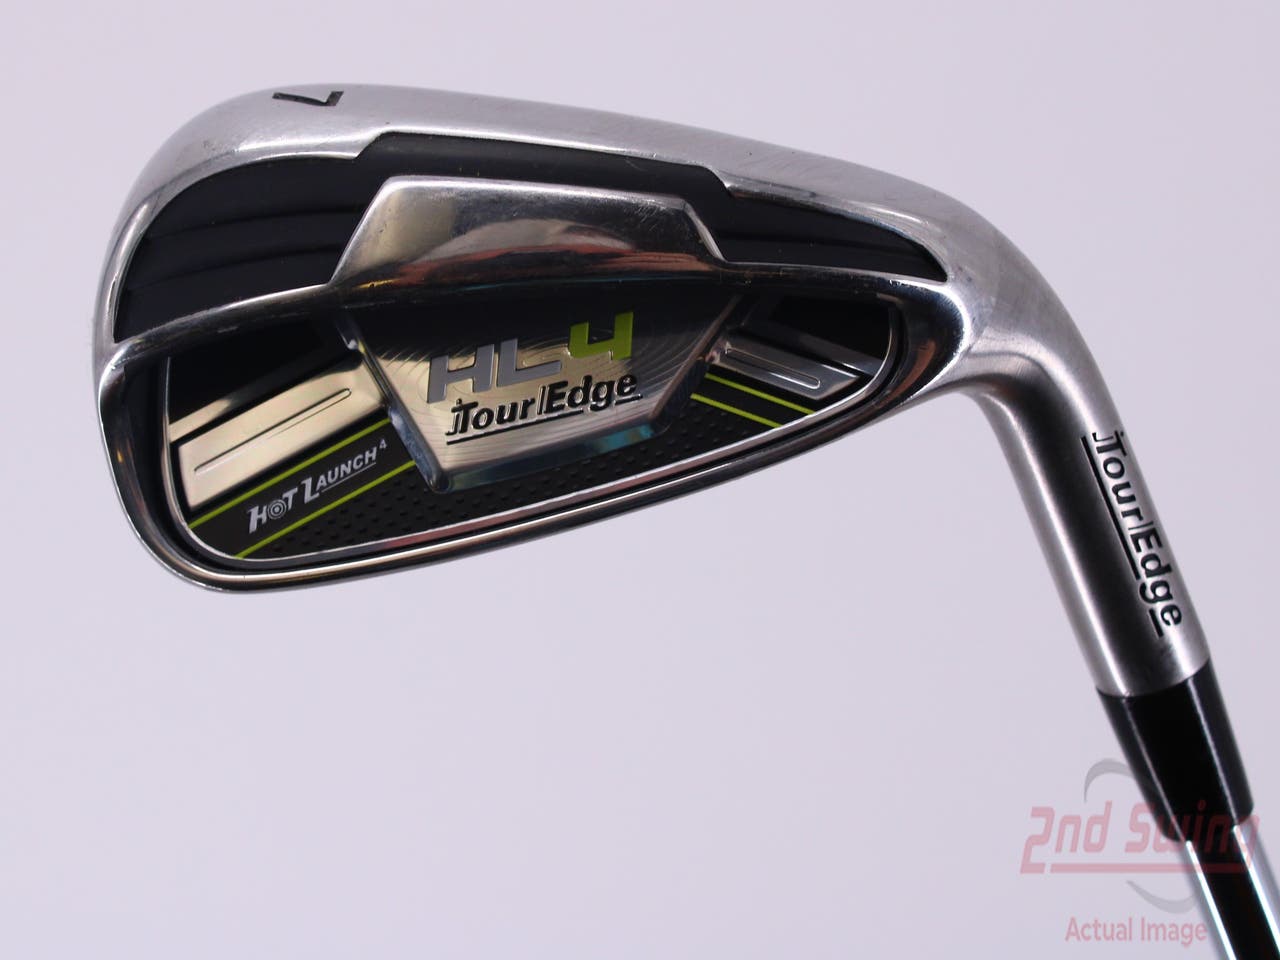 Tour Edge Hot Launch 4 Single Iron 7 Iron FST KBS Tour 90 Steel Stiff Right Handed 37.0in